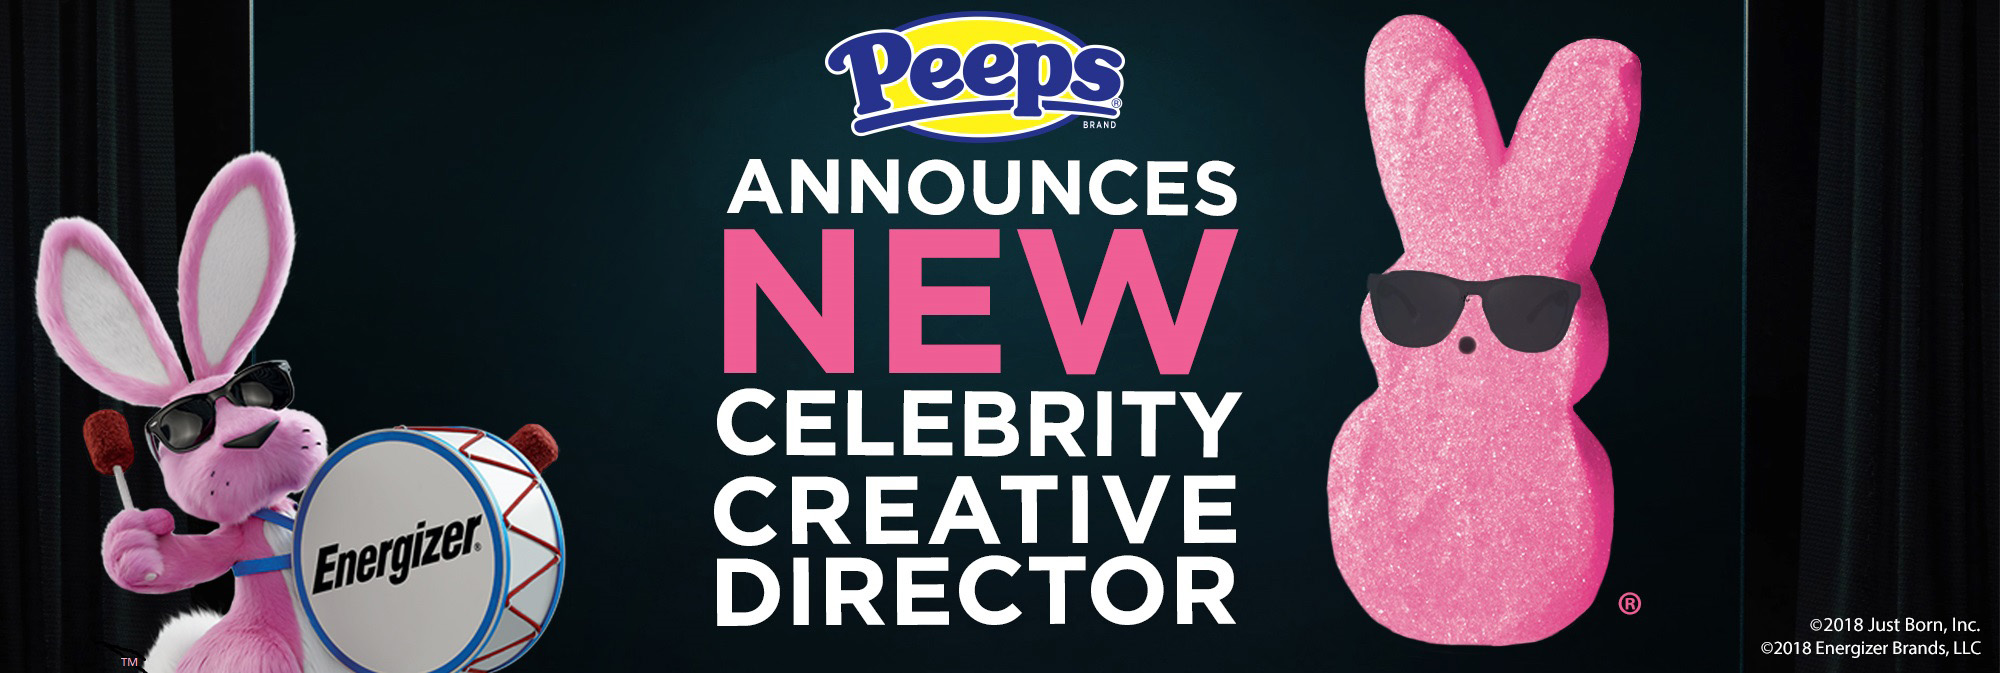 Header image stating: Peeps Announces New Celebrity Creative Director. The Energizer bunny is to the left and a pink peep with black sunglasses to the right.